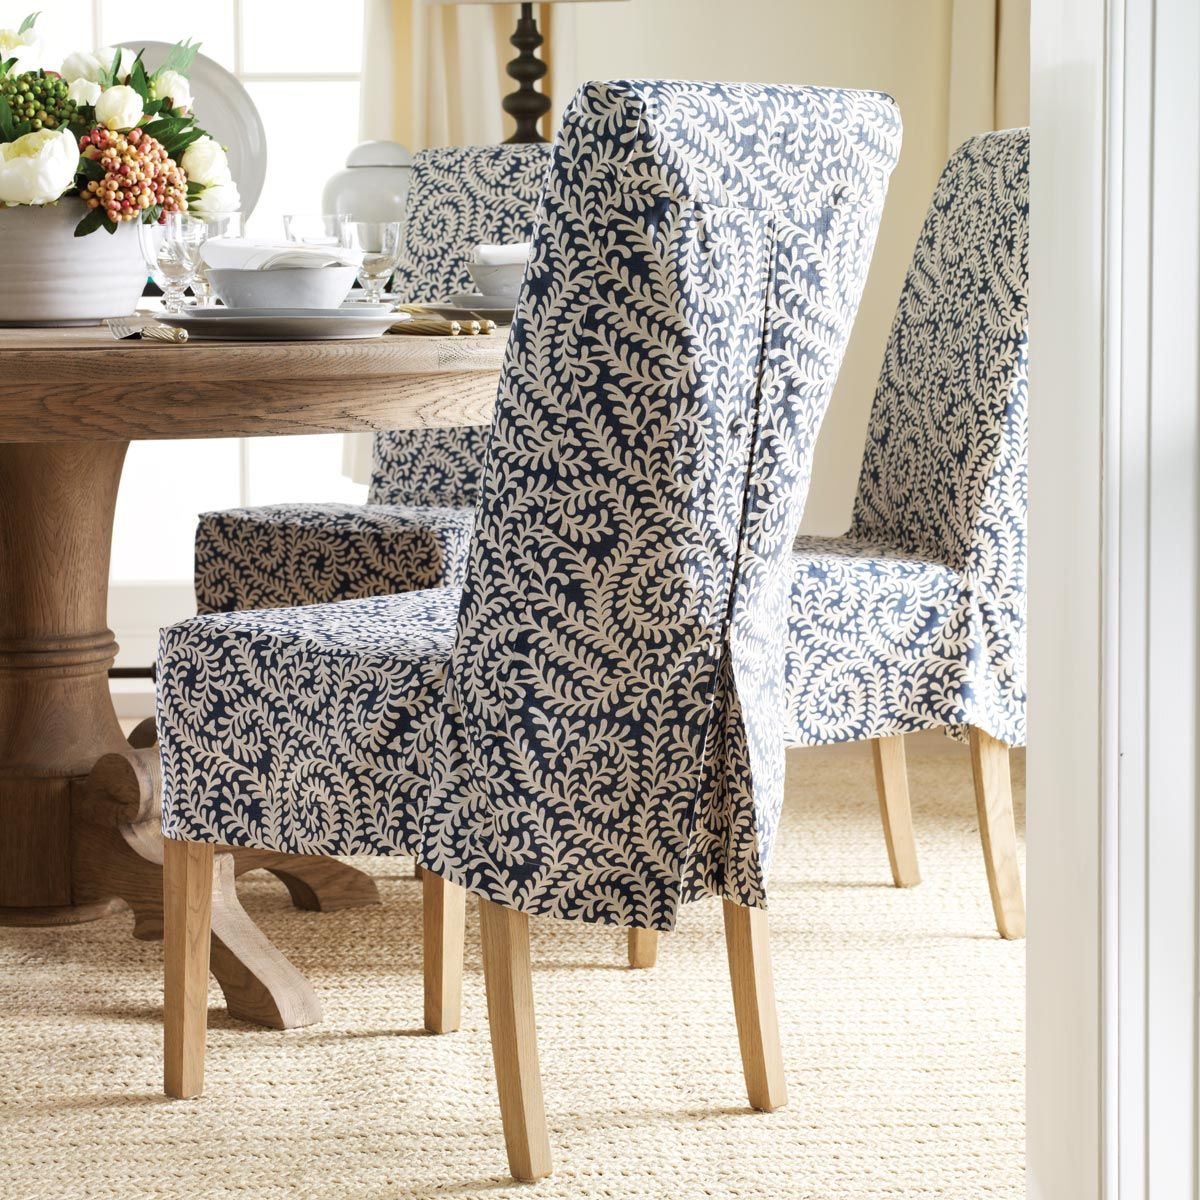 Chair Covers For Dining Room Chairs Uk • Faucet Ideas Site